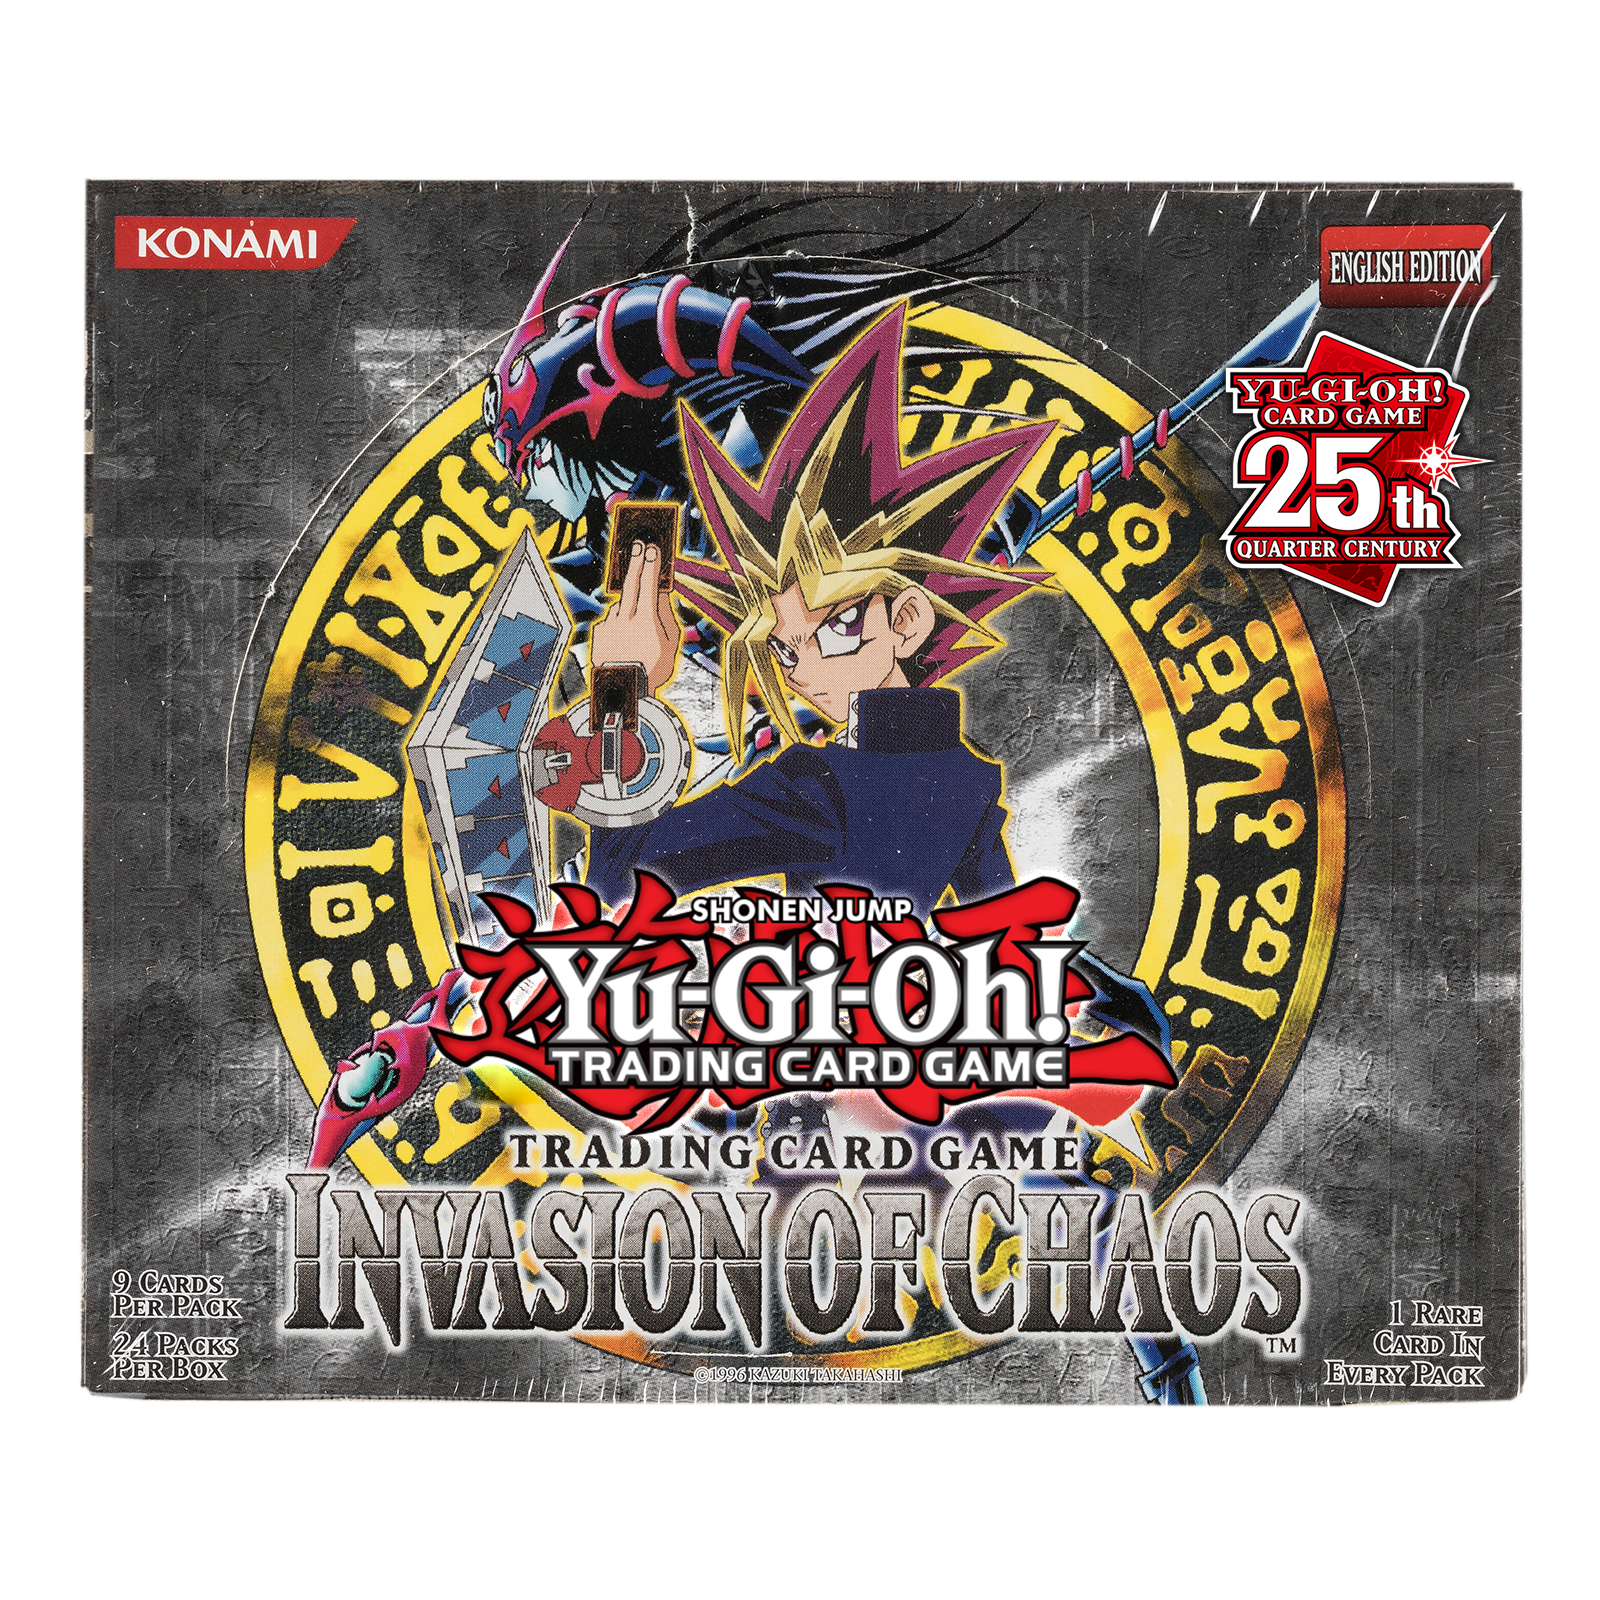 * Invasion of Chaos Booster Box 25th Anniversary Edition